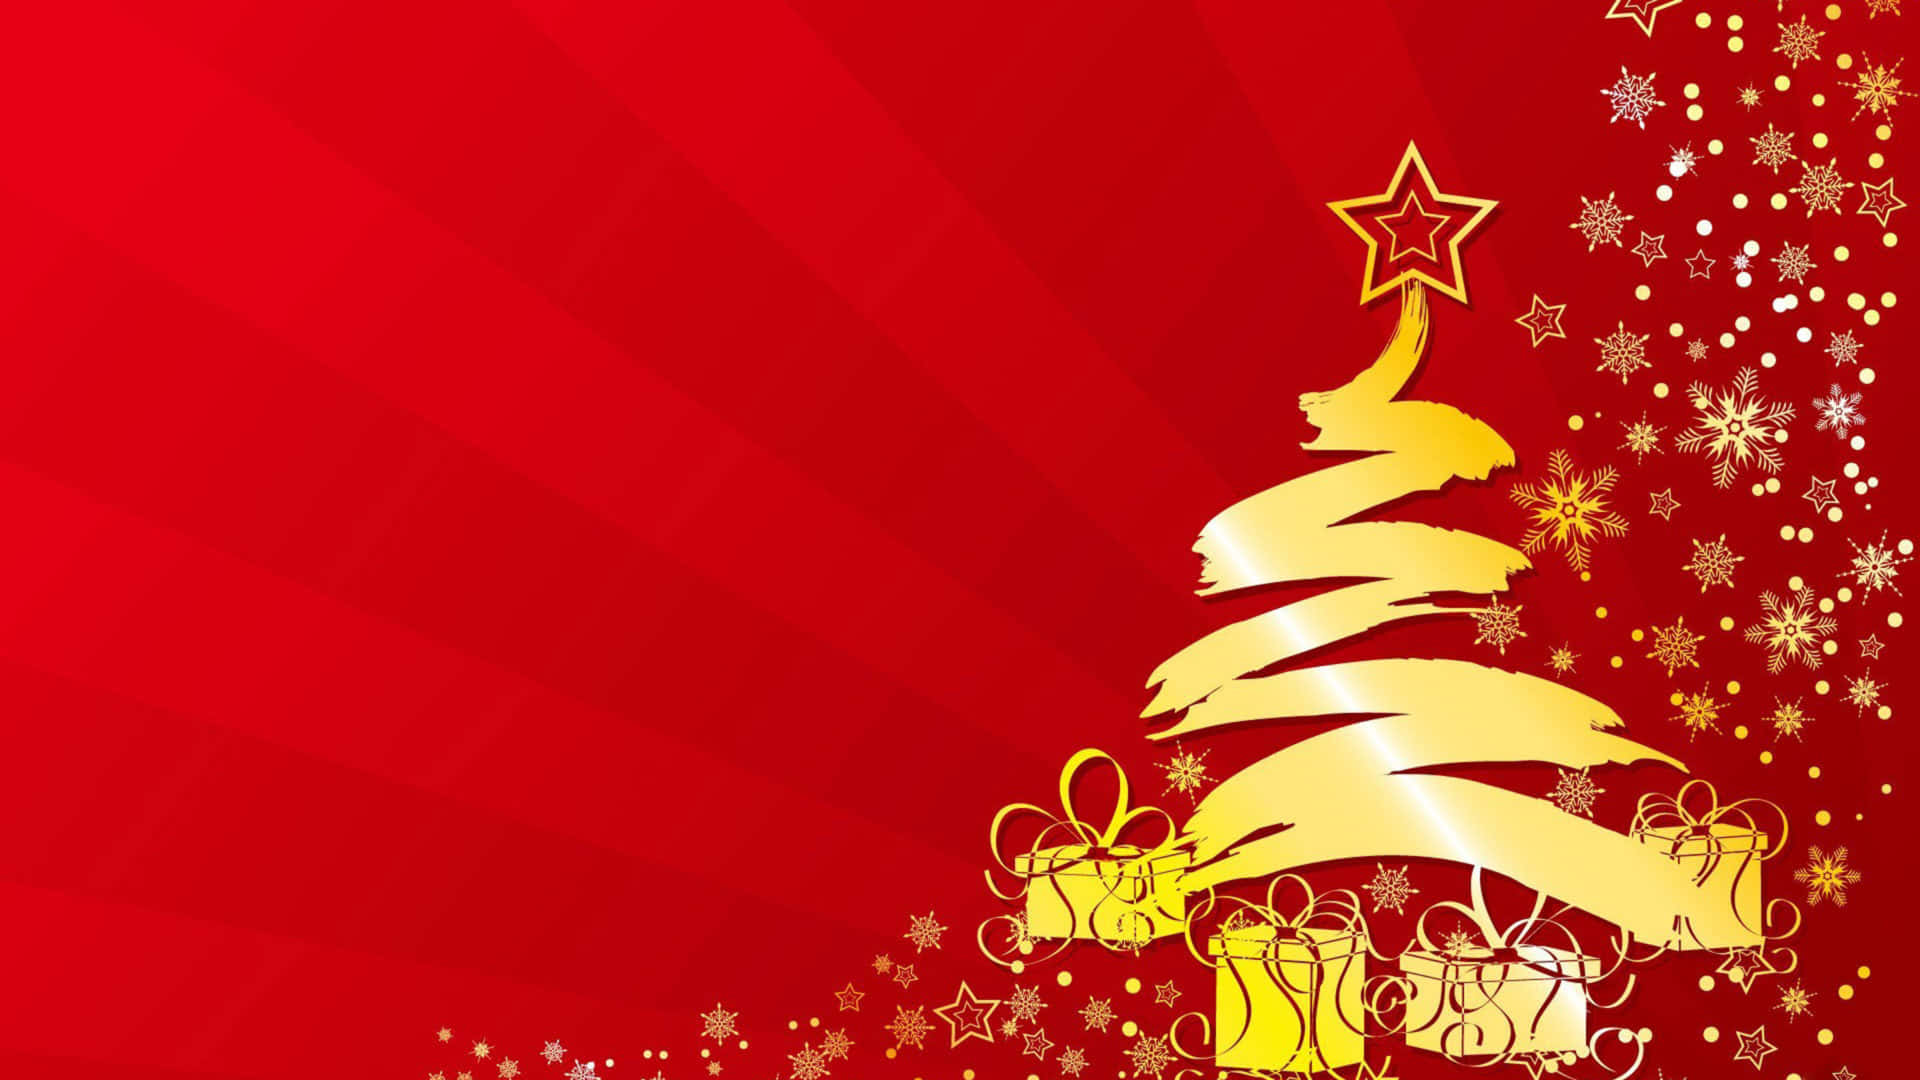 Christmas Tree On Red Background Wallpaper